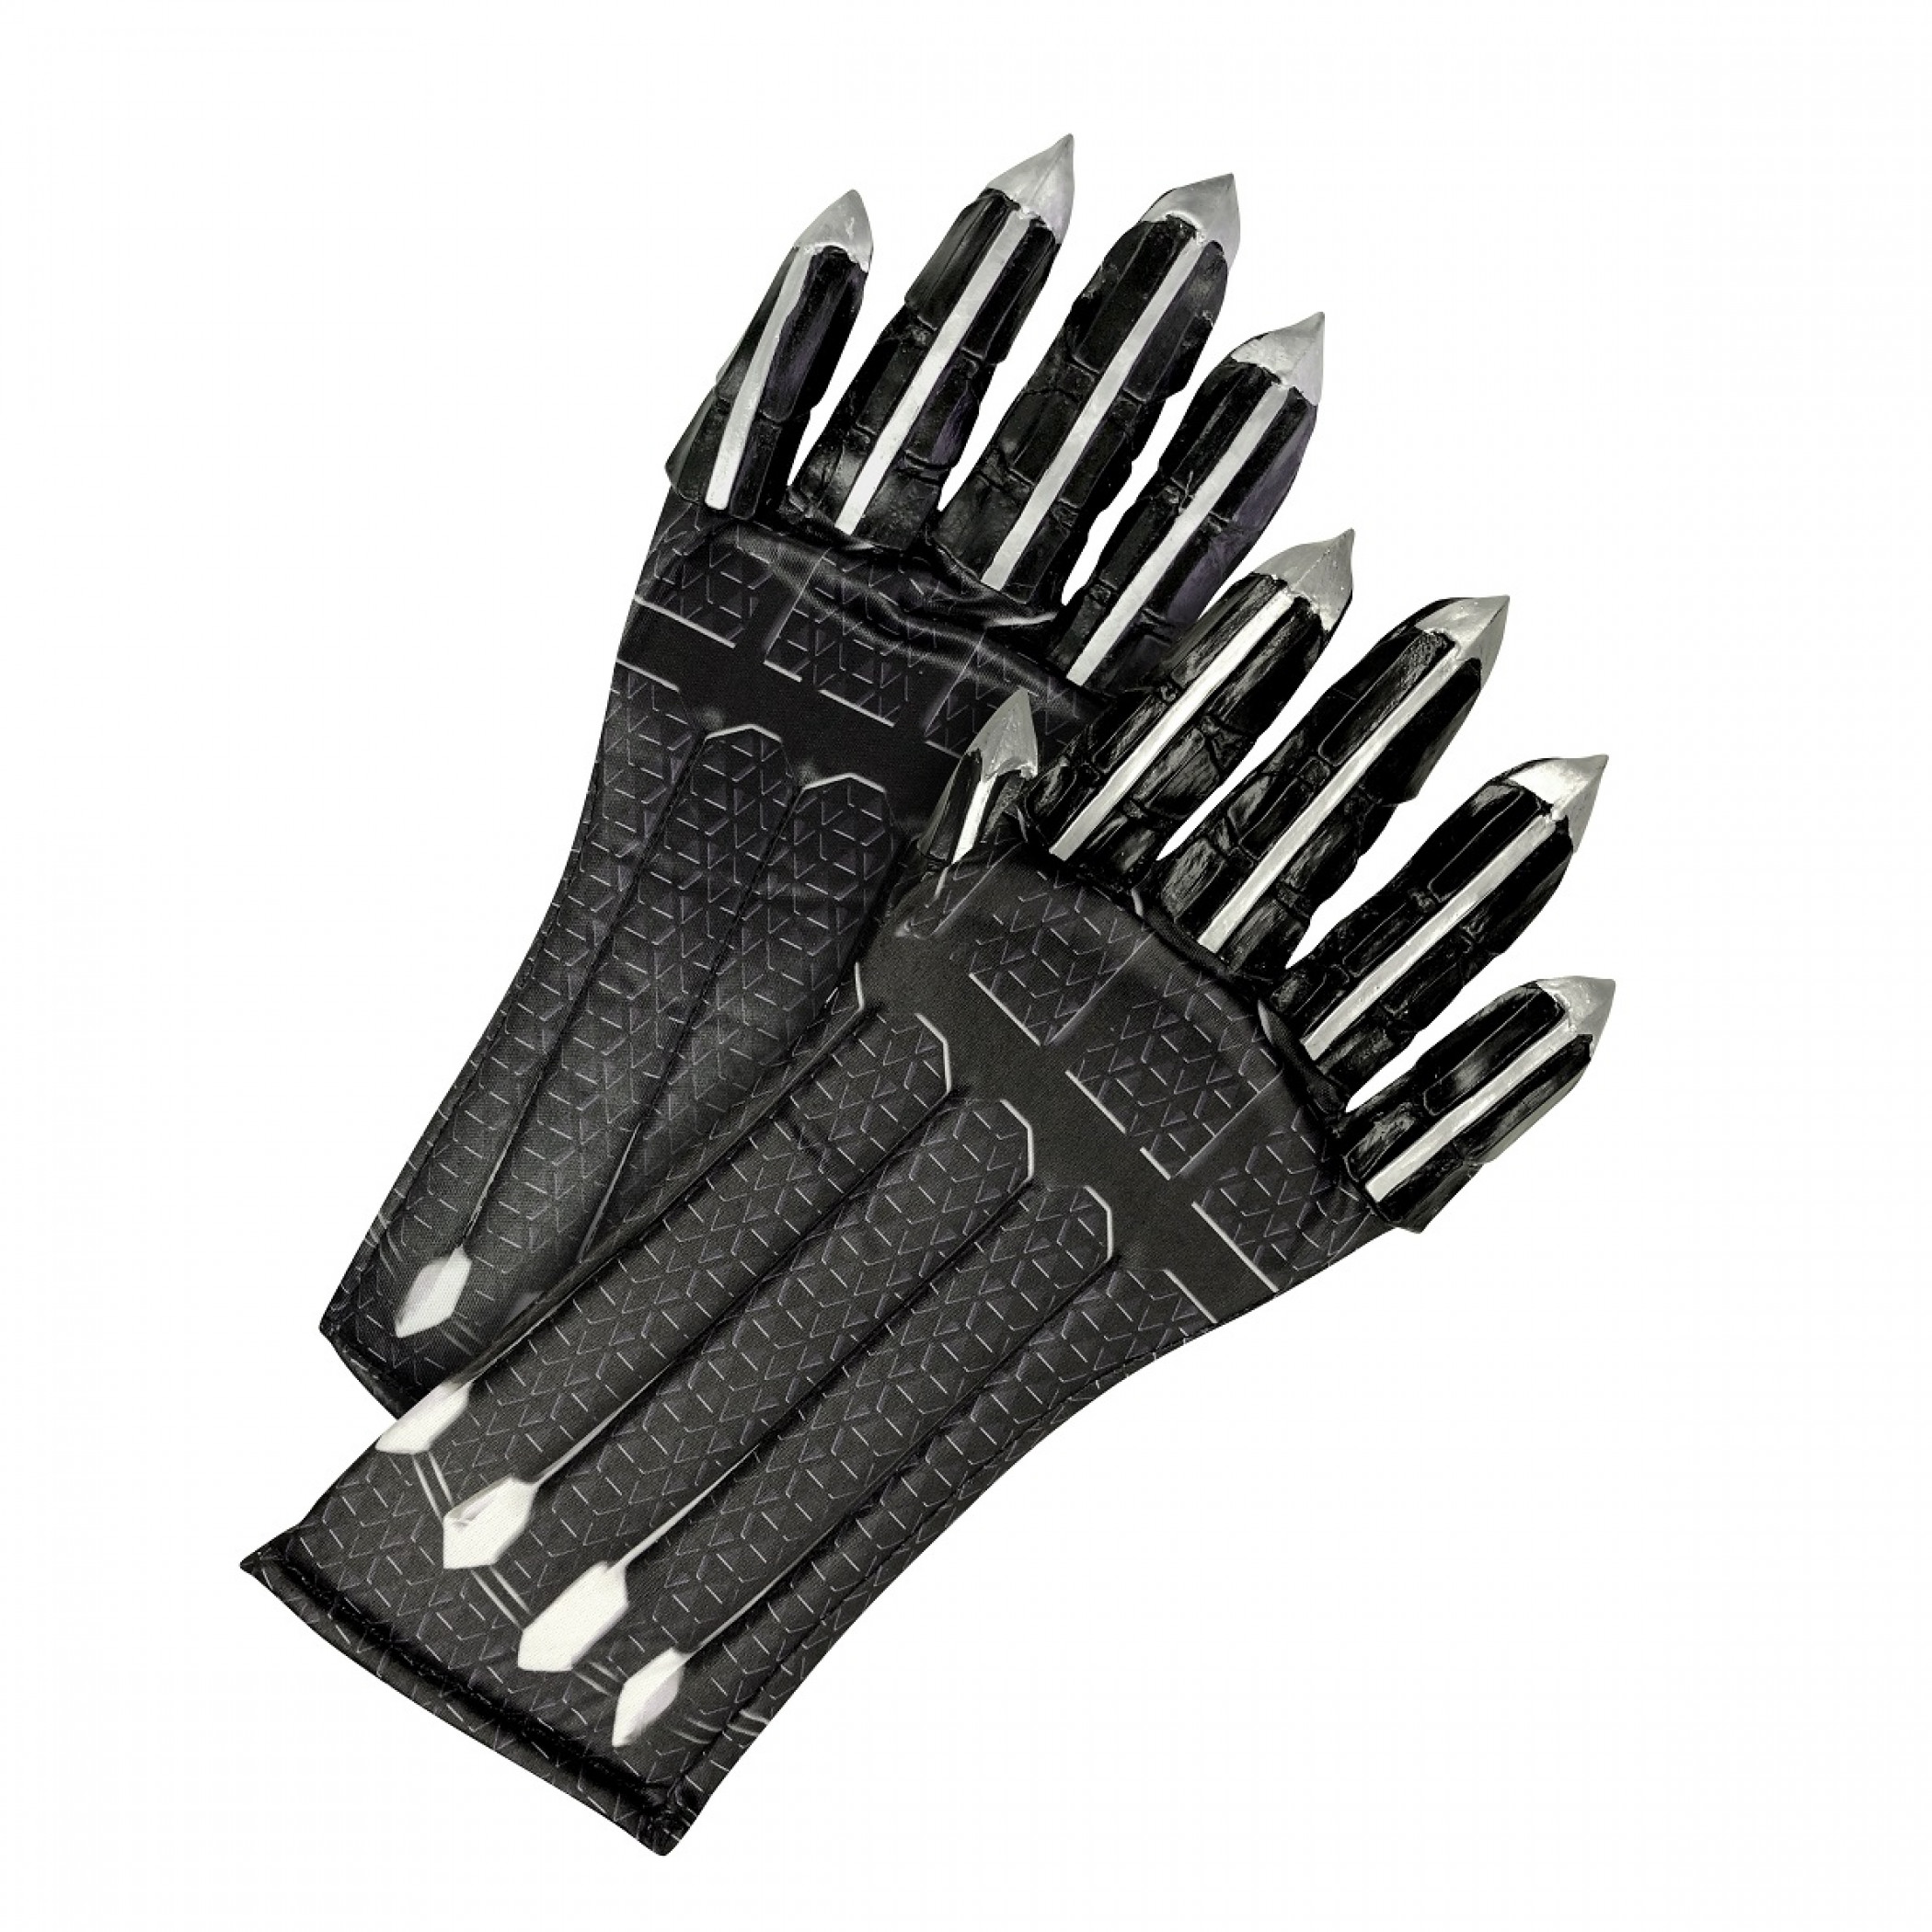 Black Panther Deluxe Kids Costume Gloves